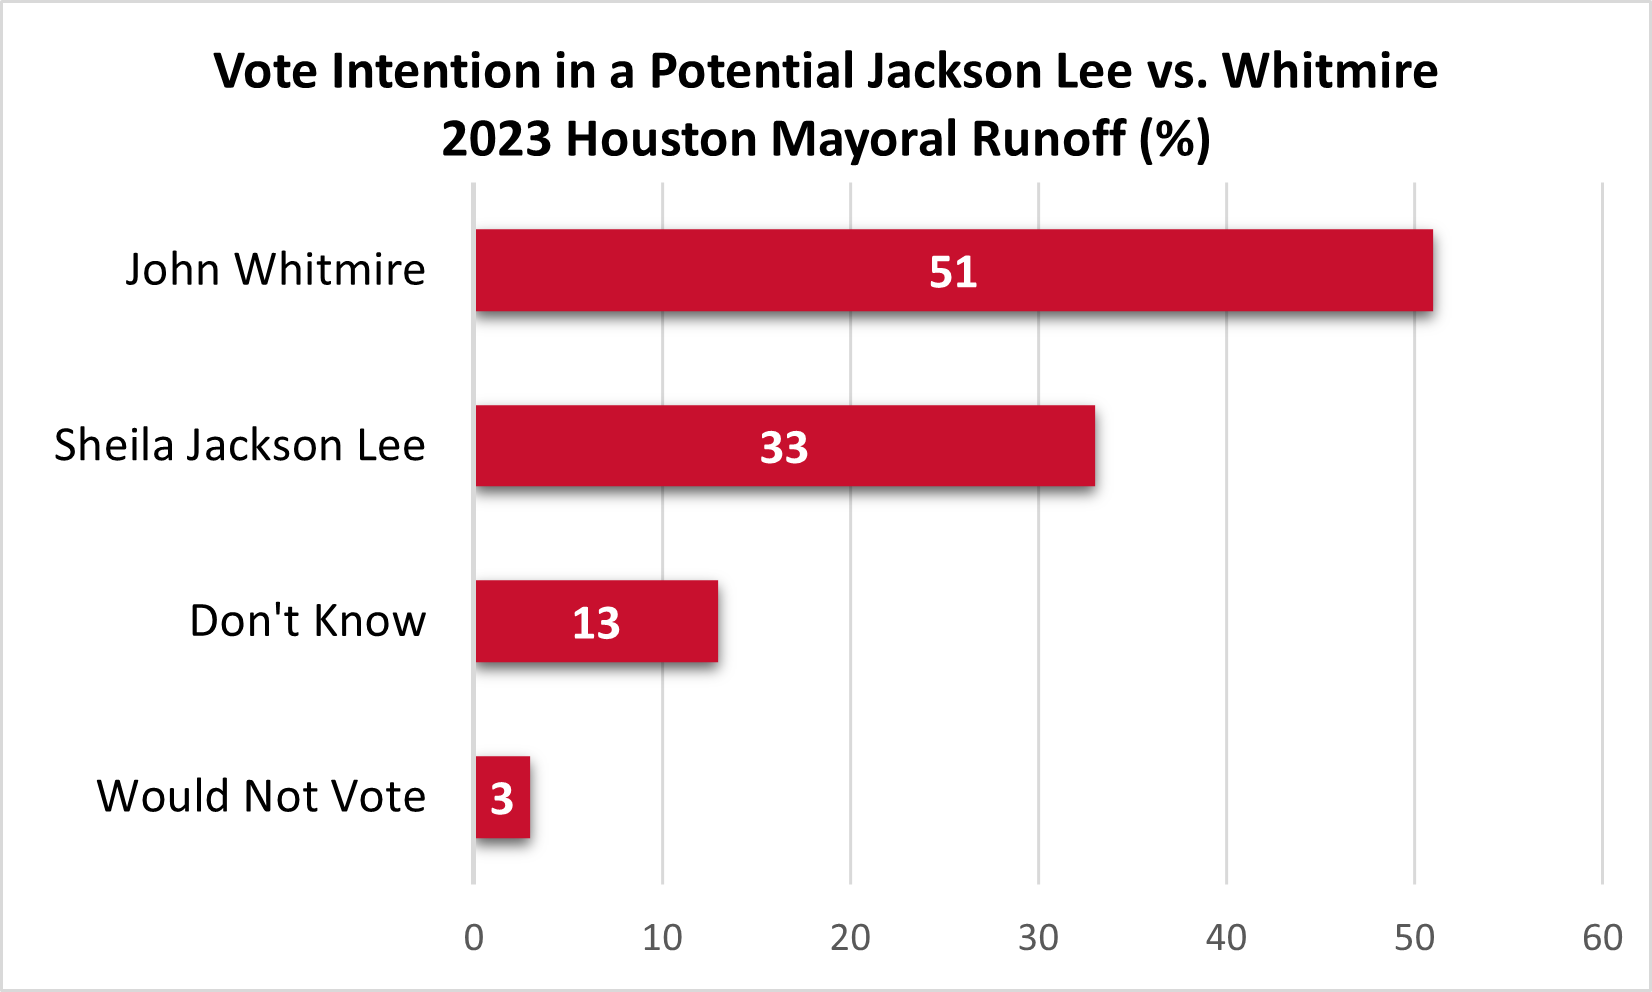 Graph of vote intention in a potential Jackson Lee vs. Whitmire runoff